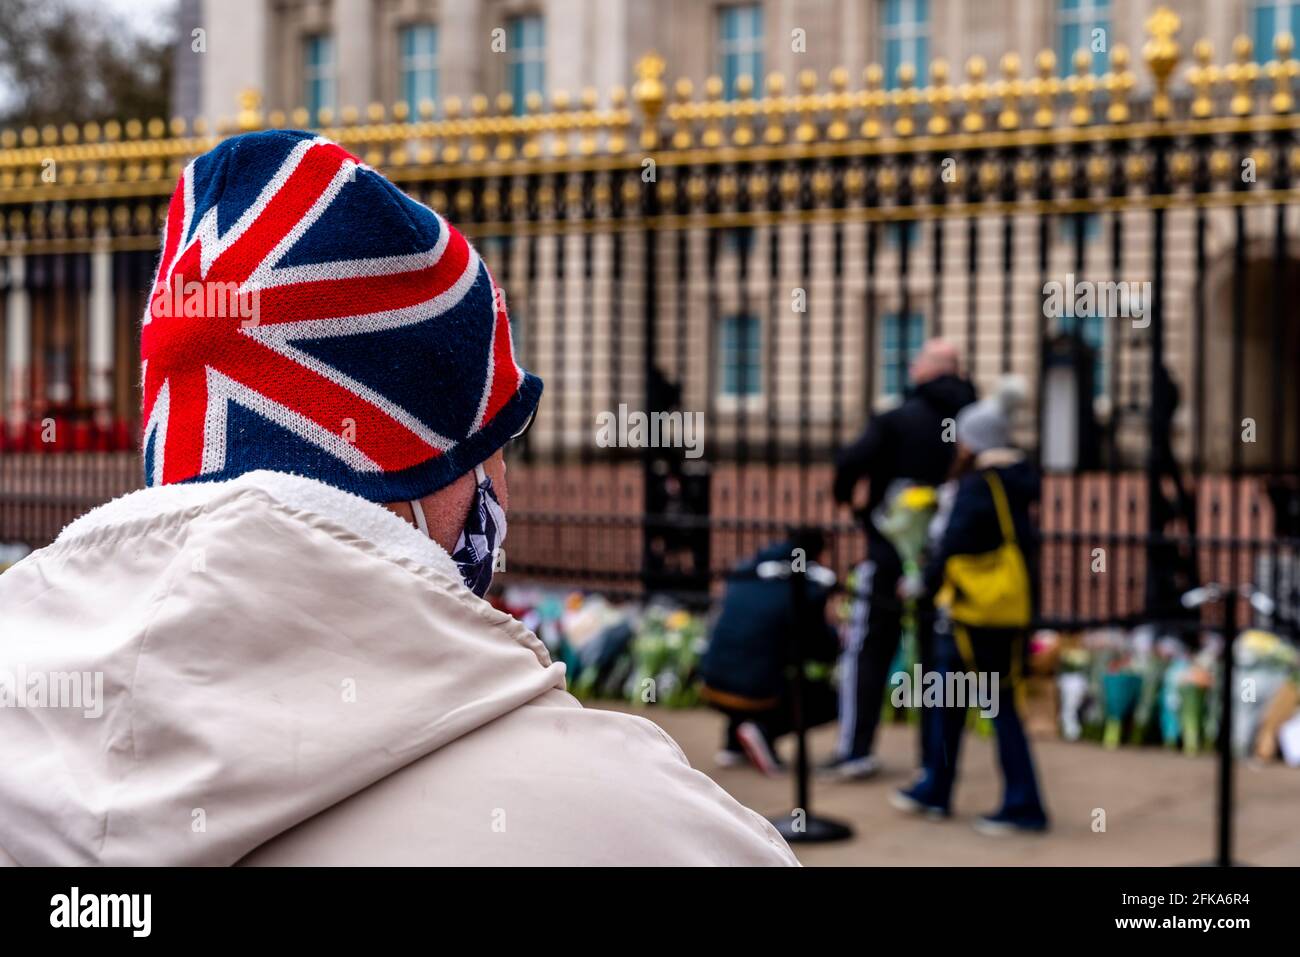 British People Pay Their Respects To Prince Philip Who Had Recently Passed Away By Laying Flowers At The Gates Of Buckingham Palace, London, UK. Stock Photo